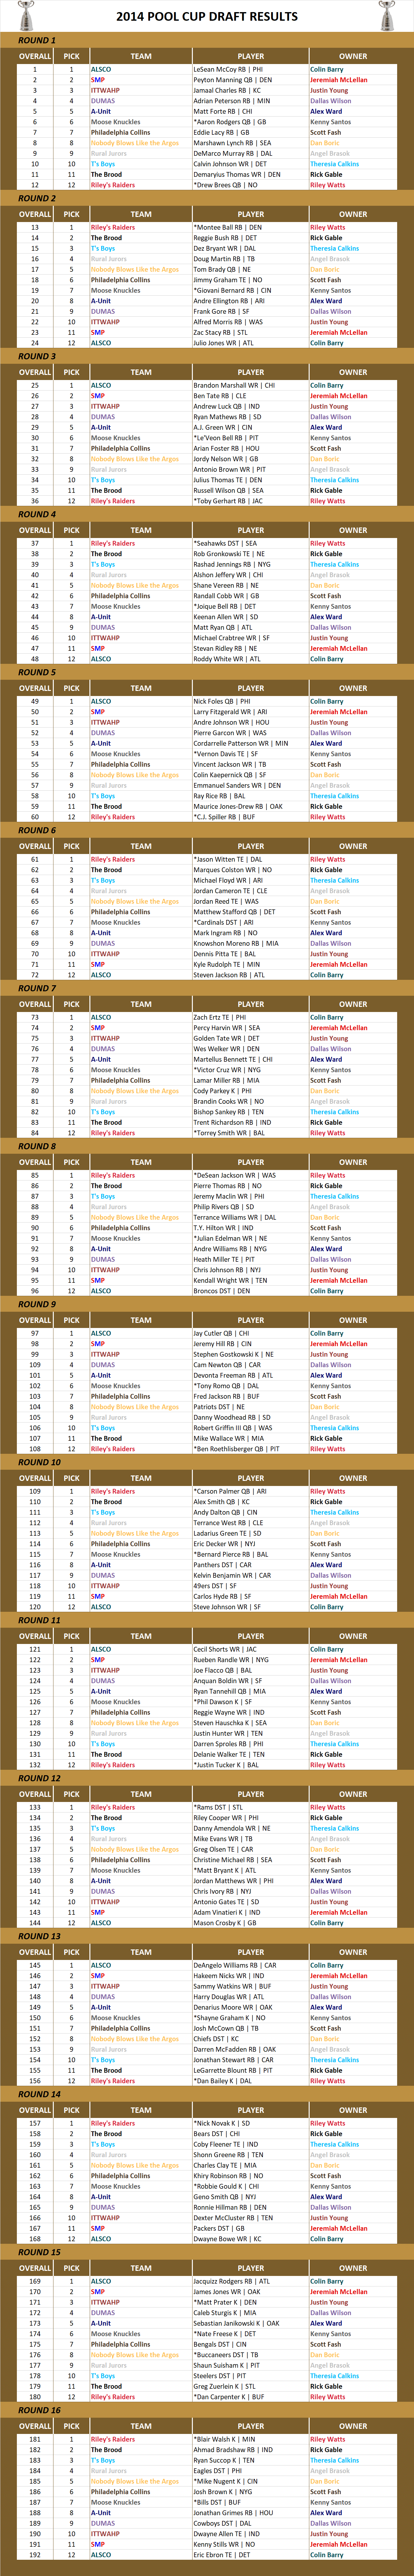 2014 National Football League Pool Draft Results